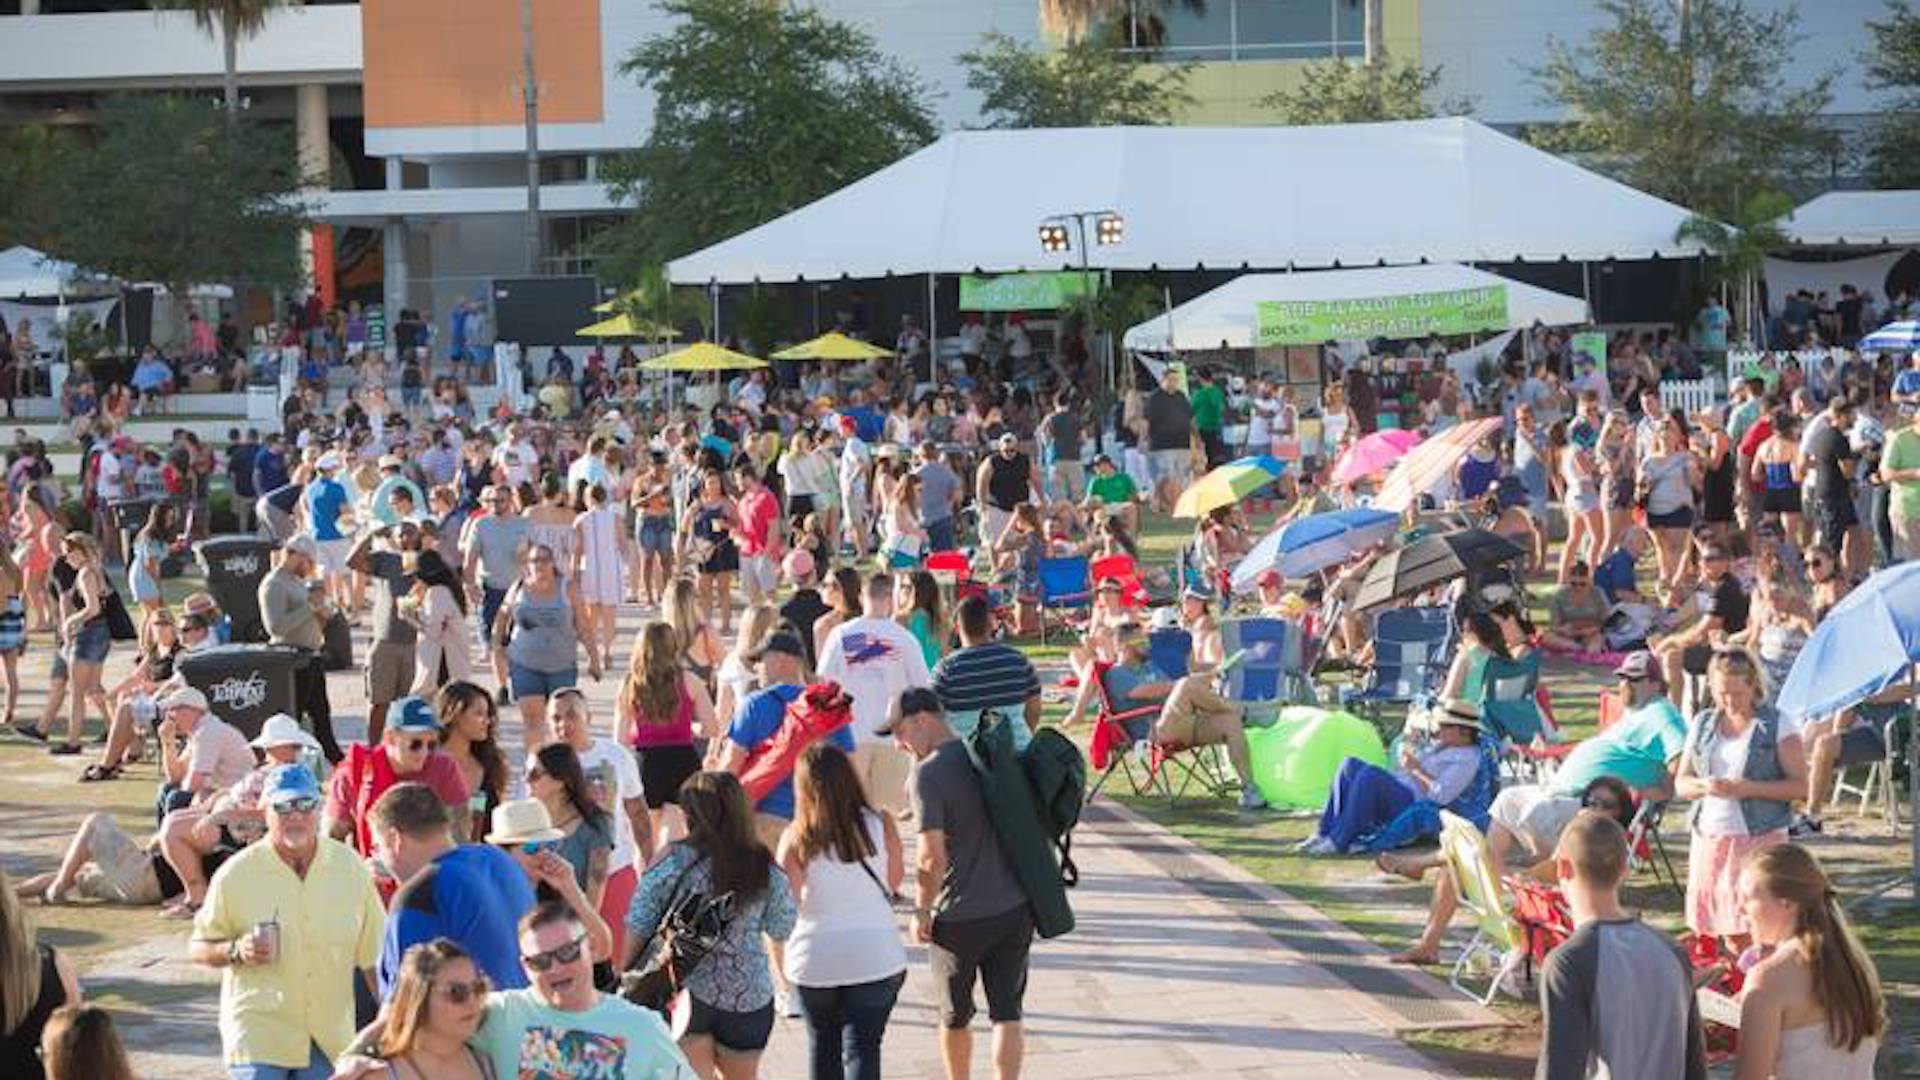 A massive margarita festival is happening this weekend in Tampa That